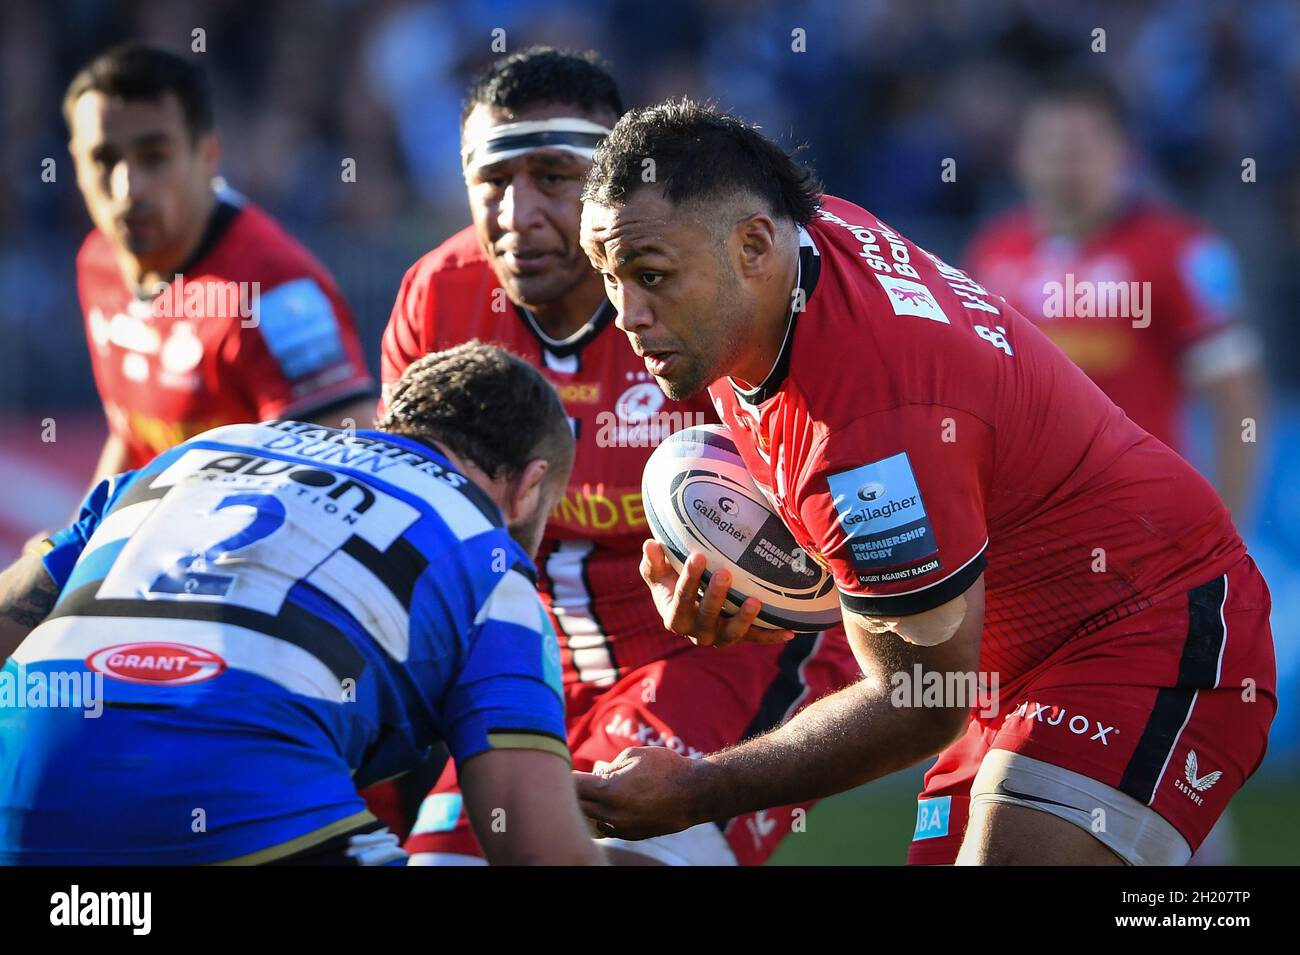 The Recreation Ground, Bath, England, UK. 17th October, 2021. Saracens' Billy Vunipola in action during the Gallagher English Premiership match between Bath Rugby and Saracens: Credit: Ashley Western/Alamy Live News Stock Photo